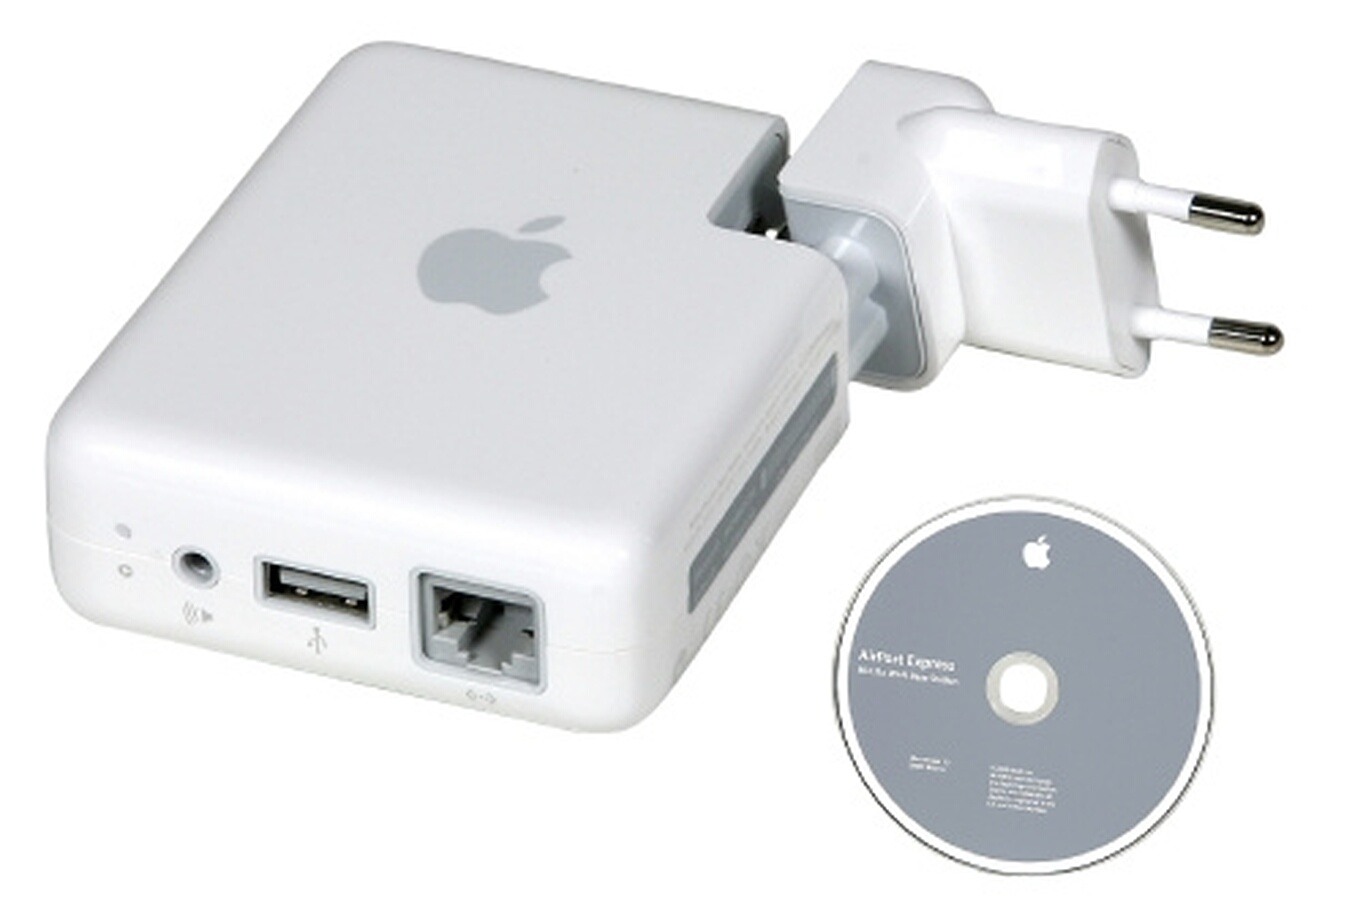 airport express software download for mac